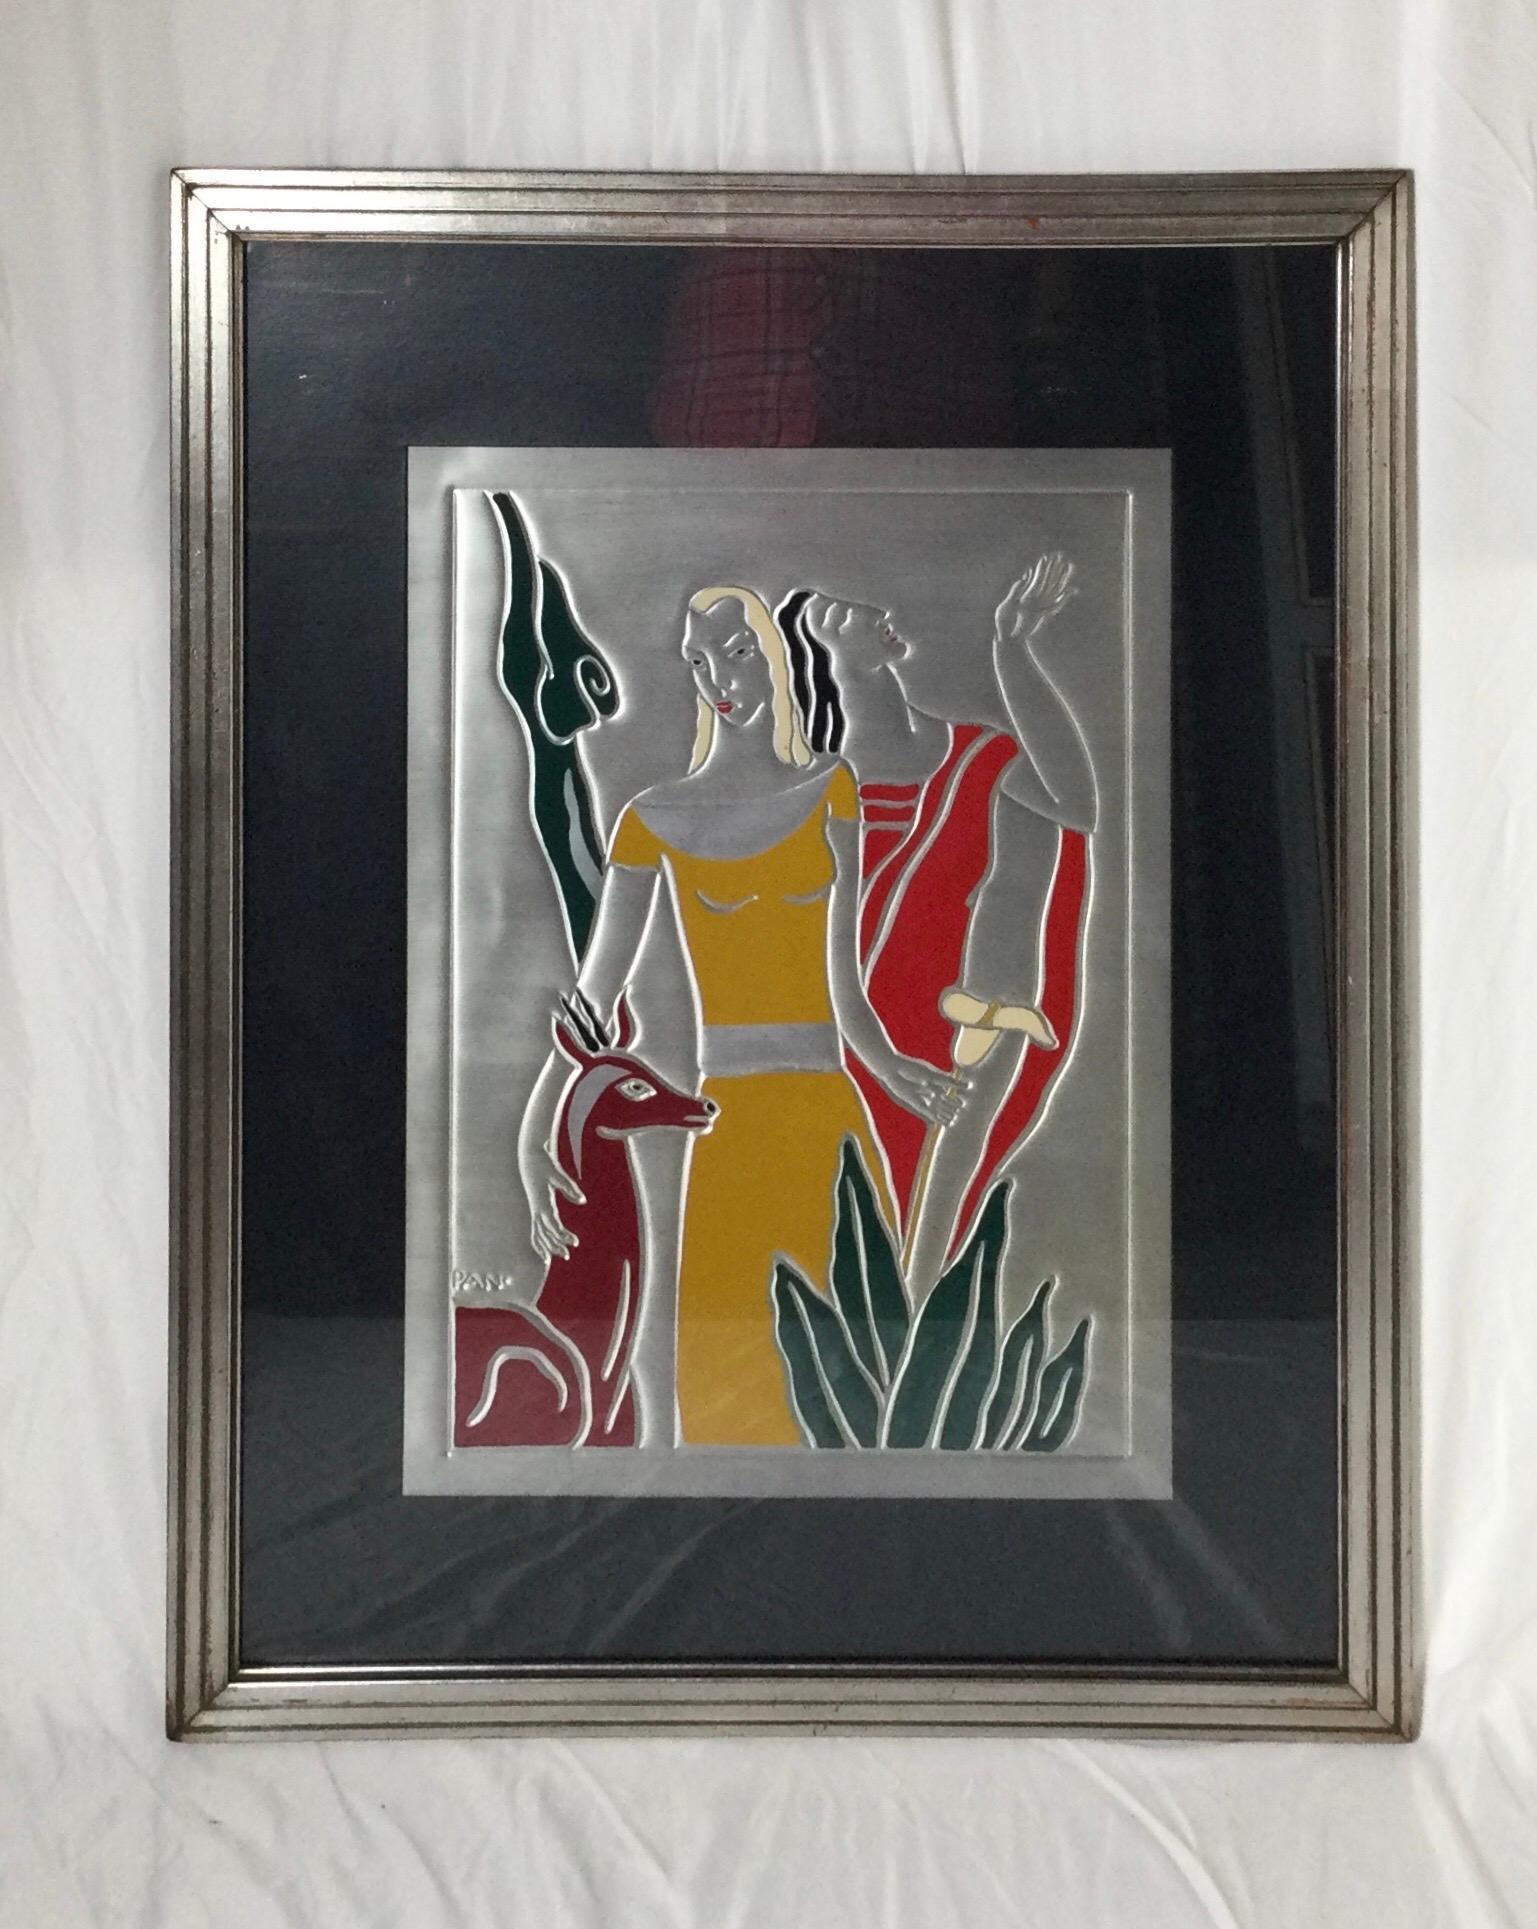 A pair of French Art Deco metallic embosses and painted wall art with silver leaf frames. High style and very chic art deco depictions signed PAN on bottom left.